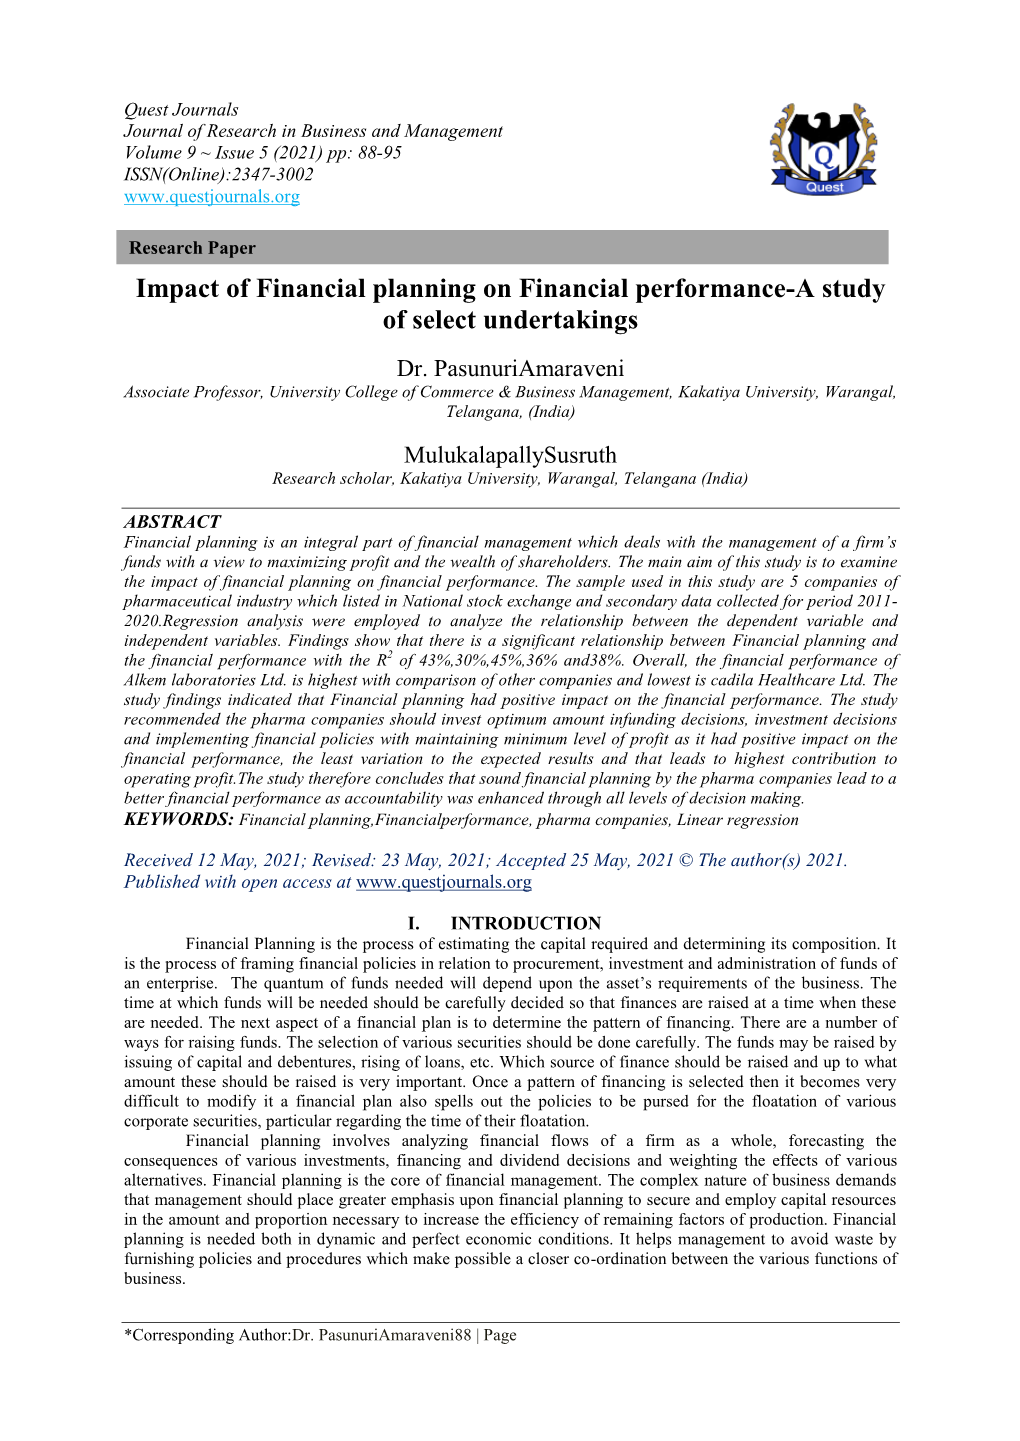 Impact of Financial Planning on Financial Performance-A Study of Select Undertakings